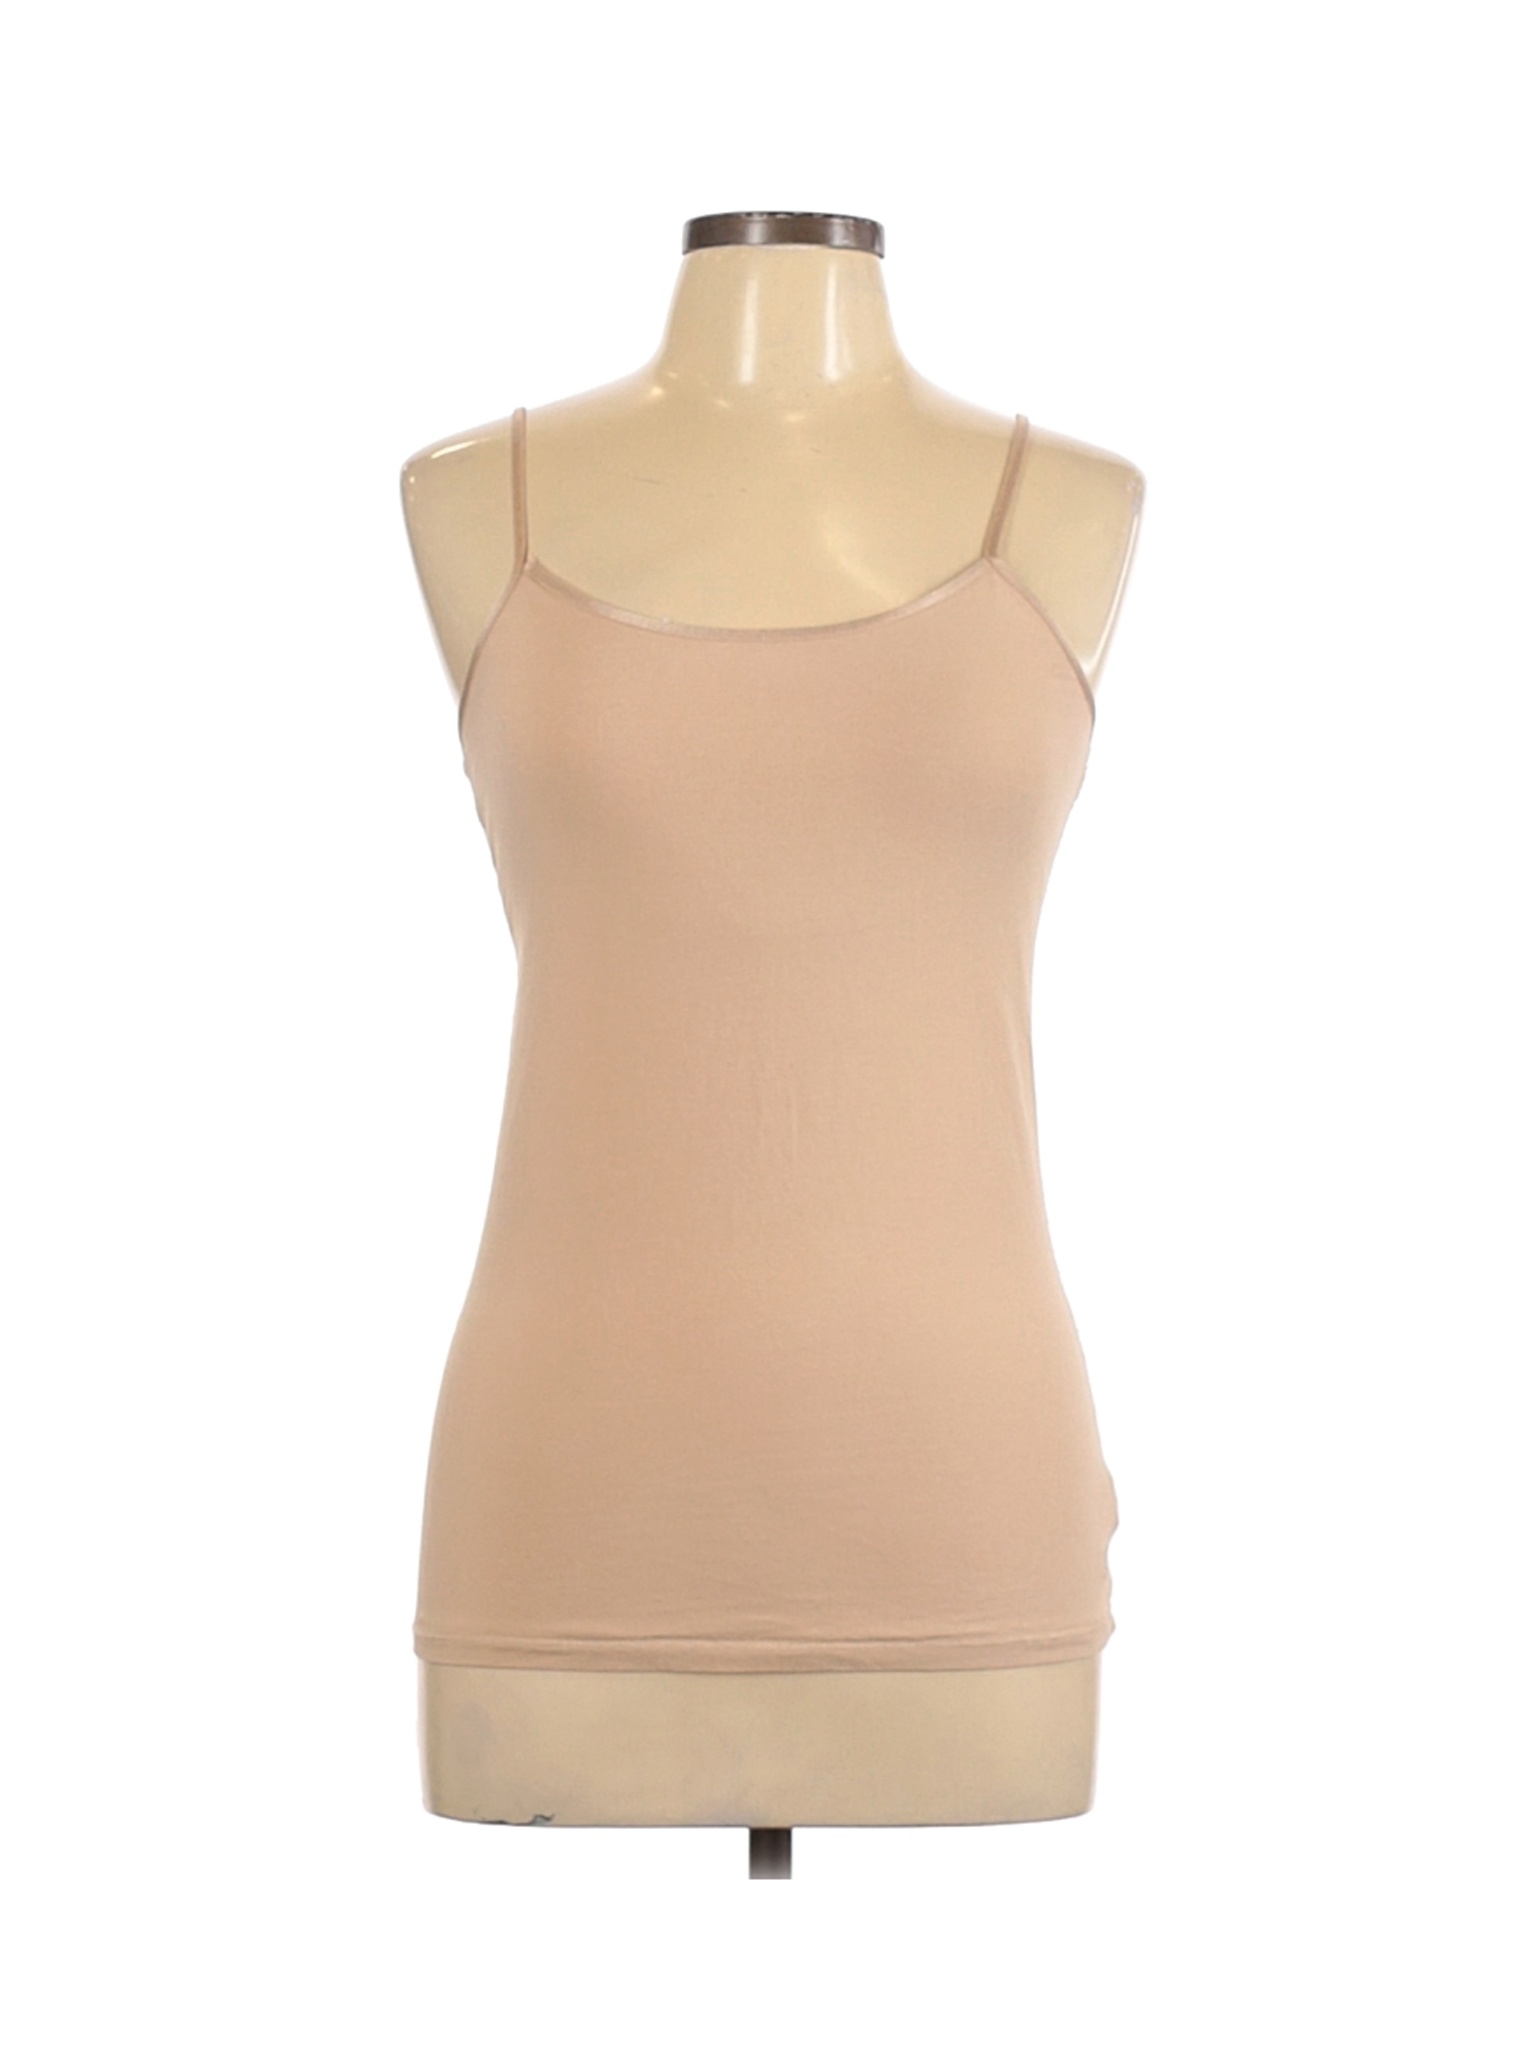 American Eagle Outfitters Women Brown Tank Top L | eBay